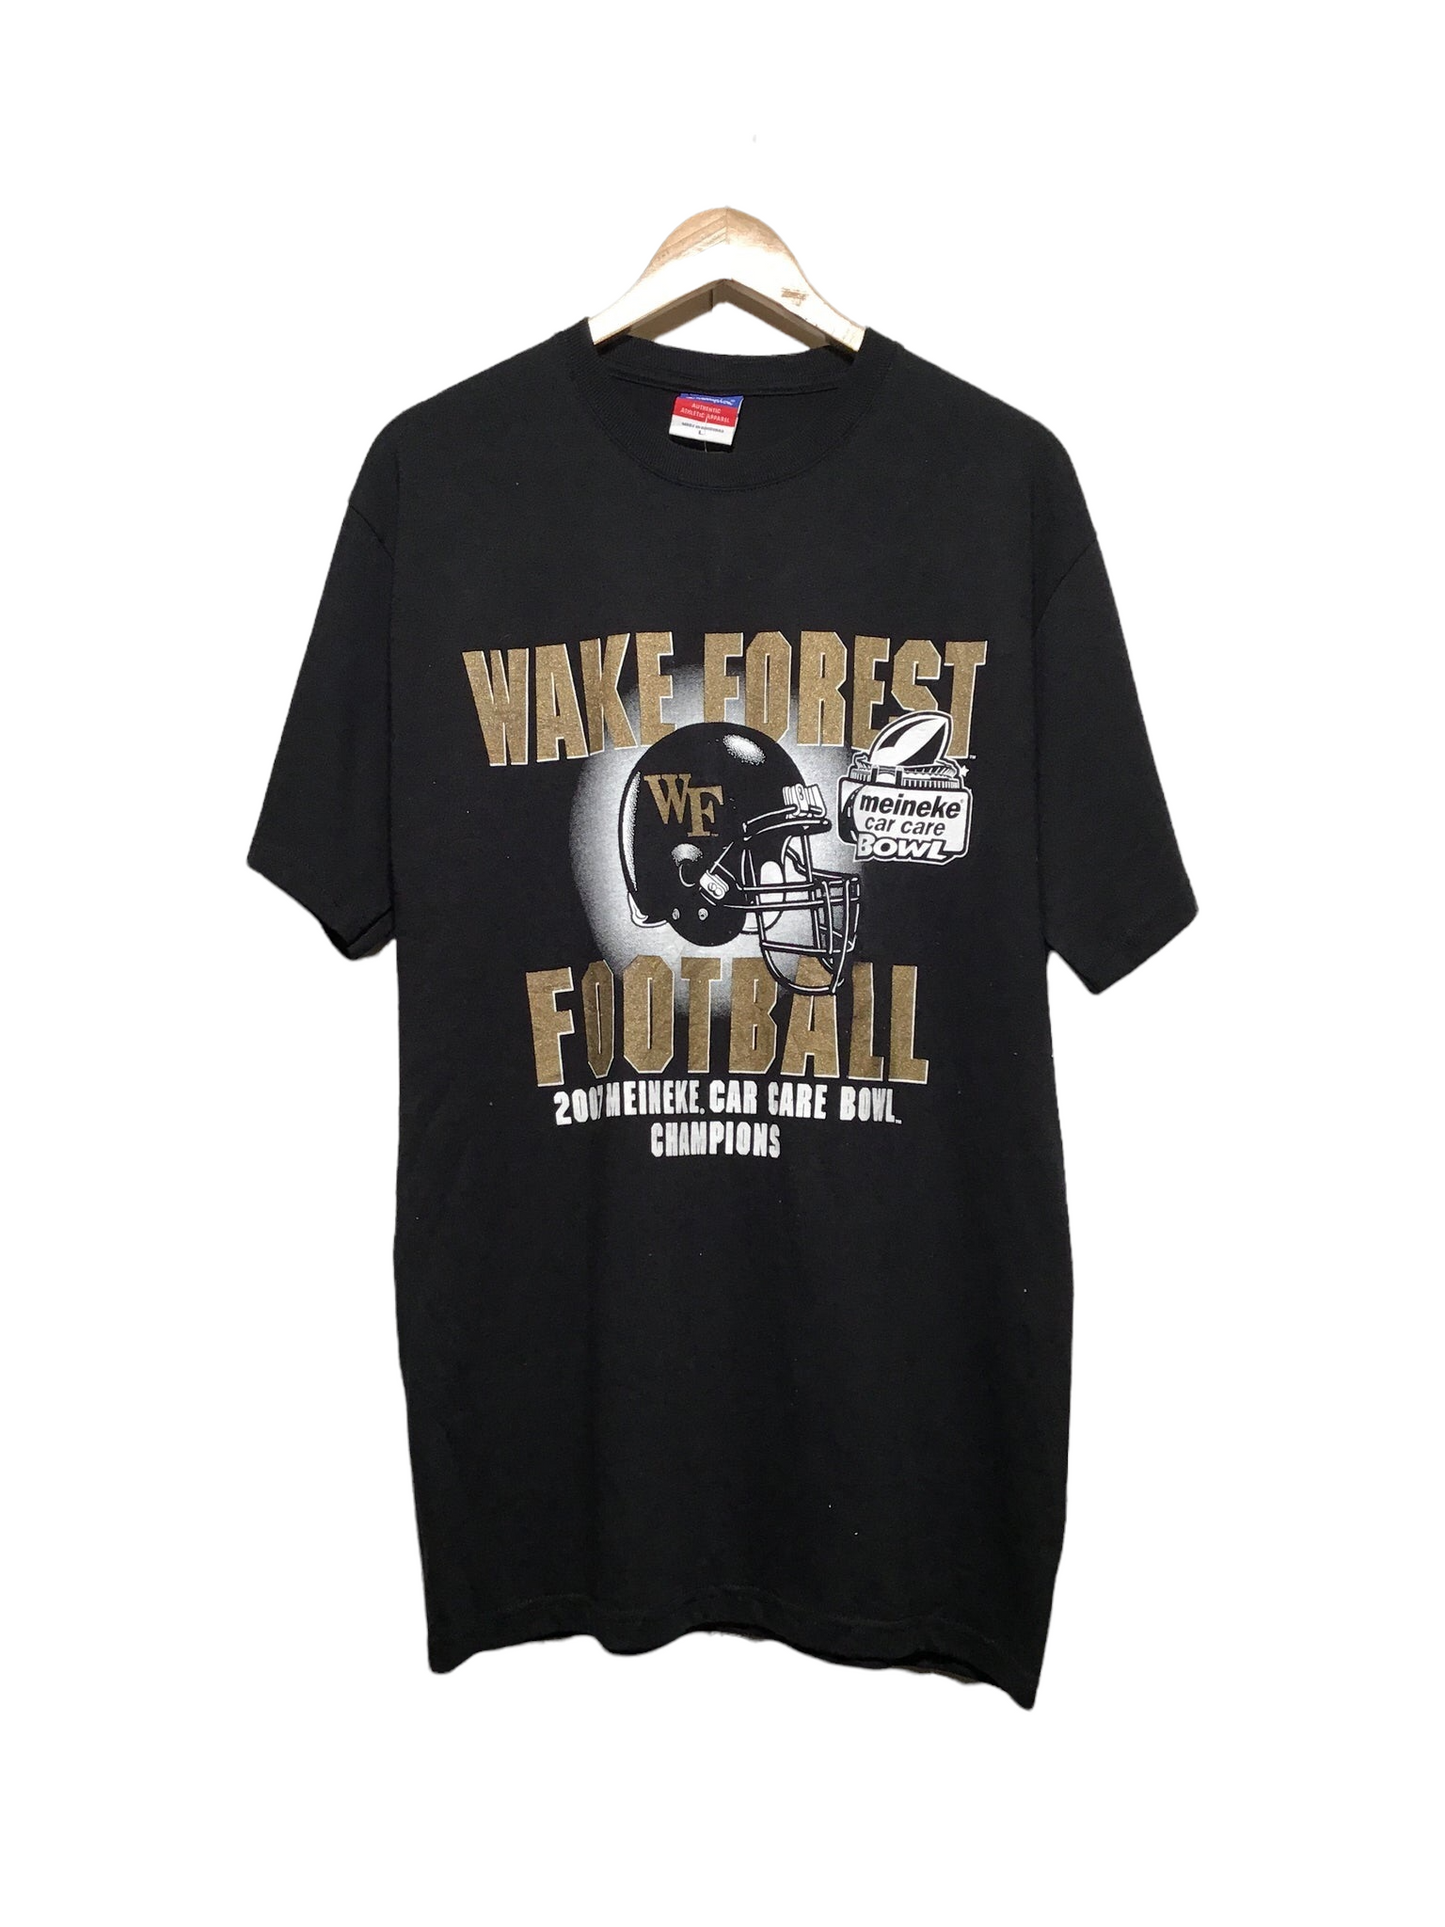 Champion Wake Forest Tee (Size XL)